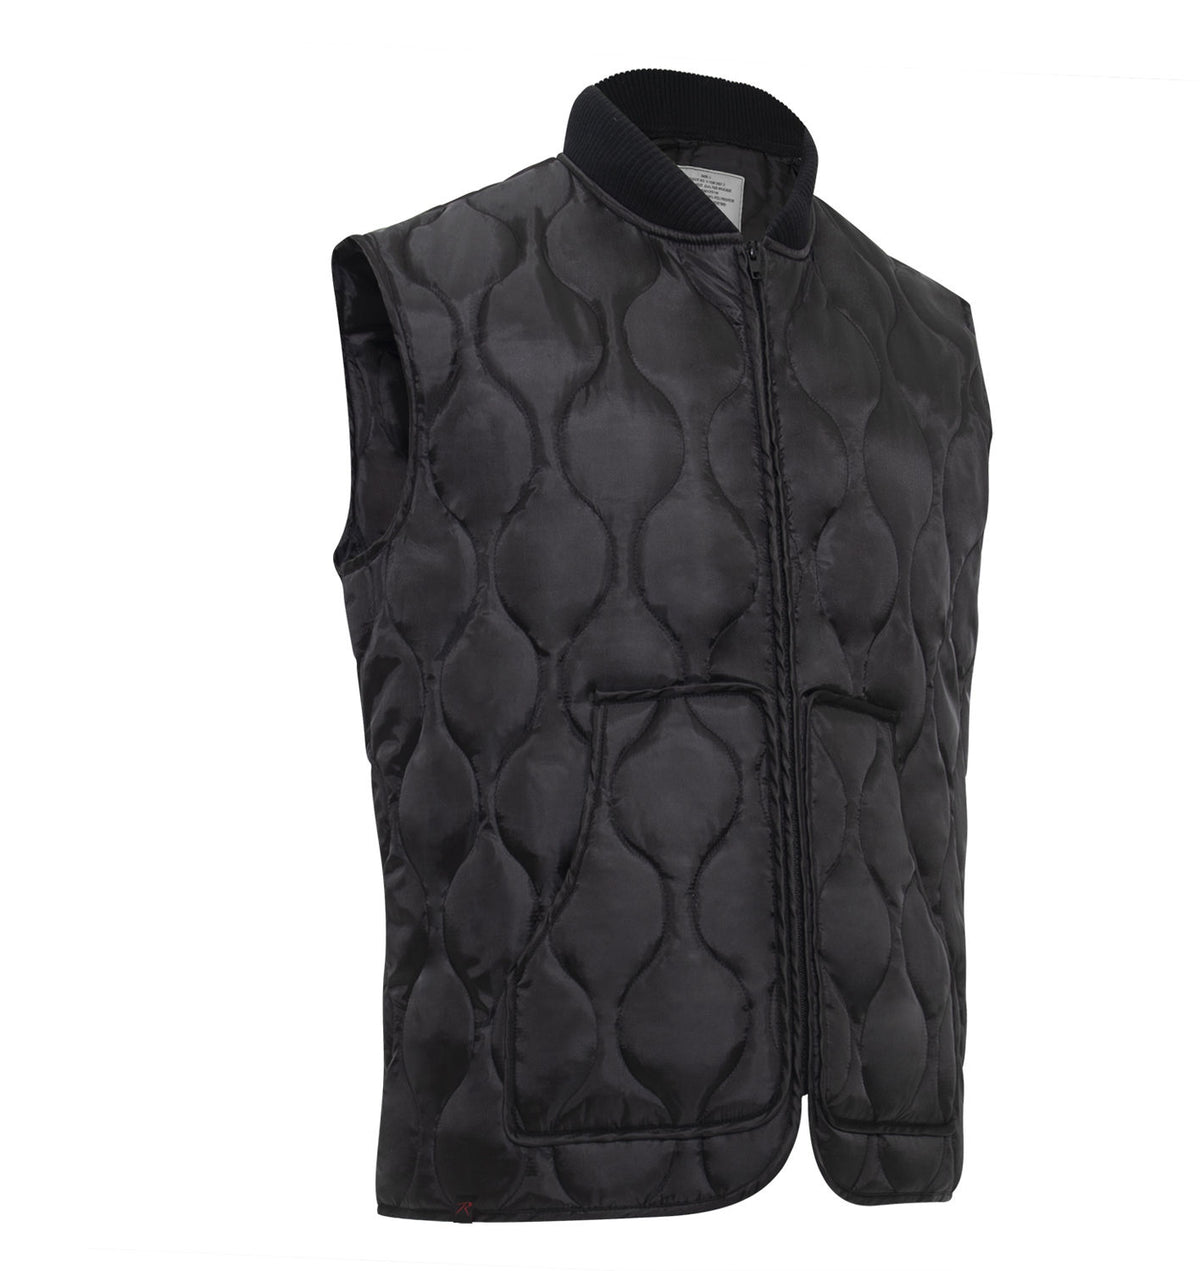 Rothco Quilted Woobie Vest